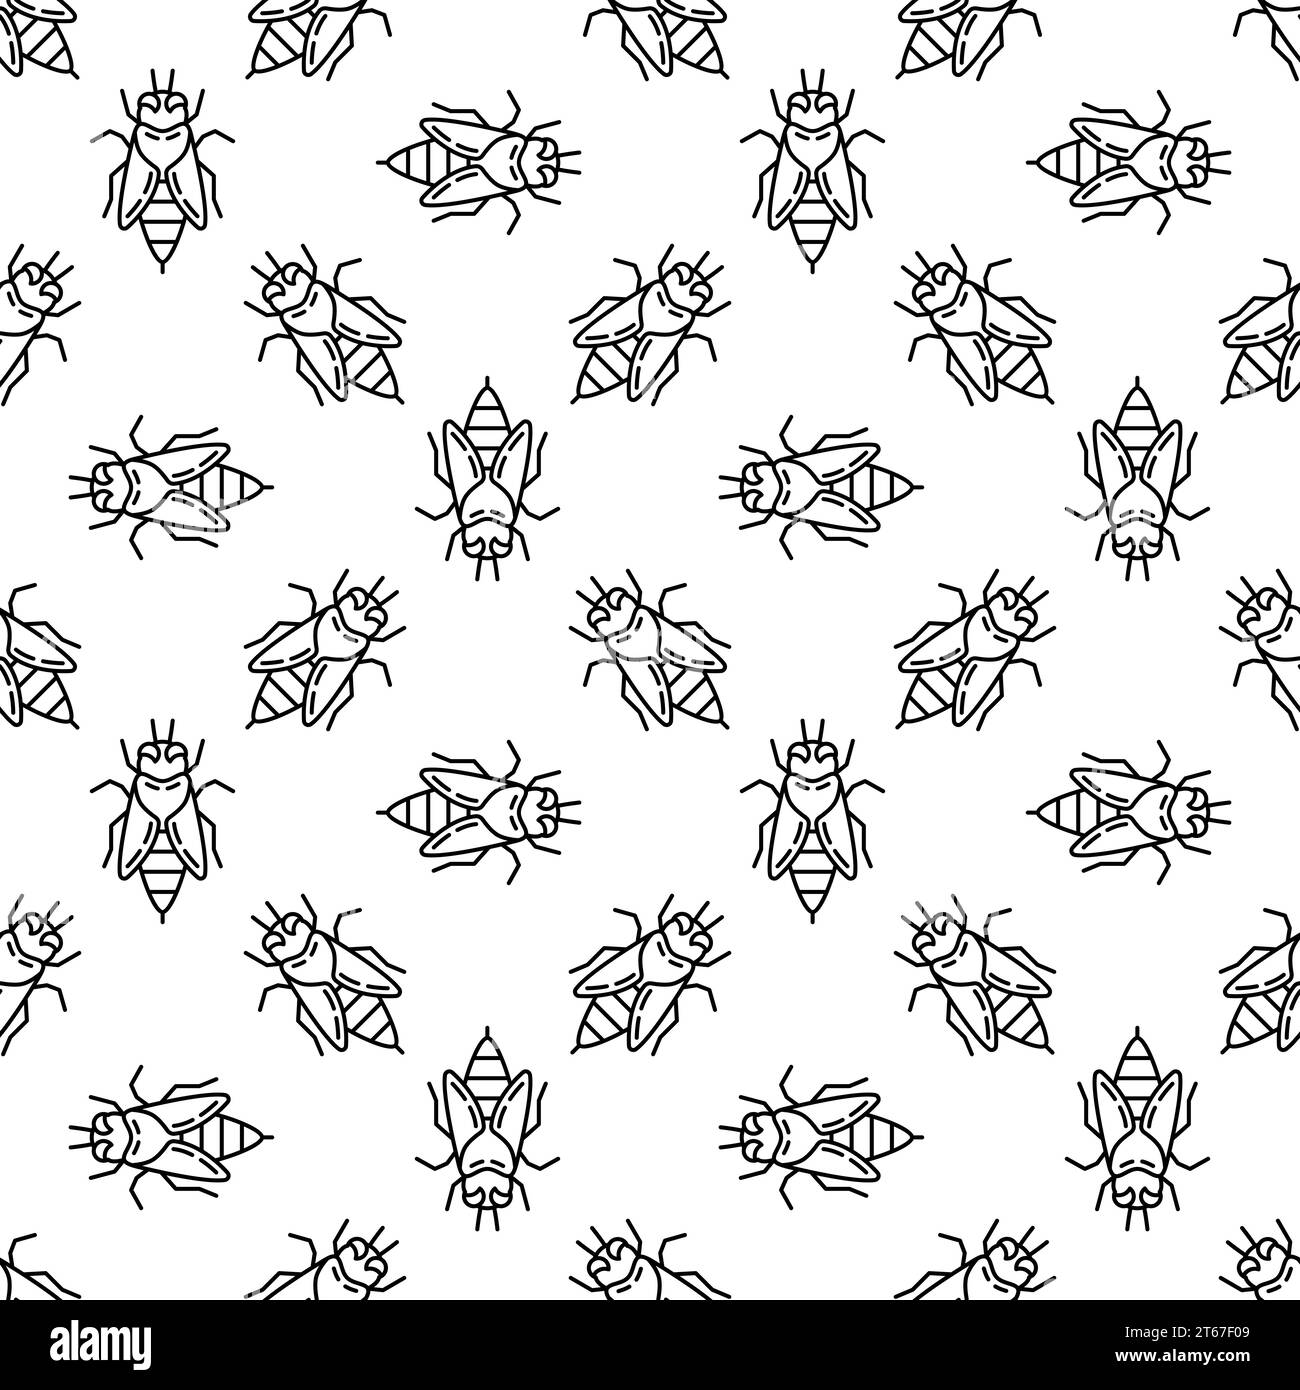 Honey bee seamless pattern. Vector background made of outline bees icons Stock Vector